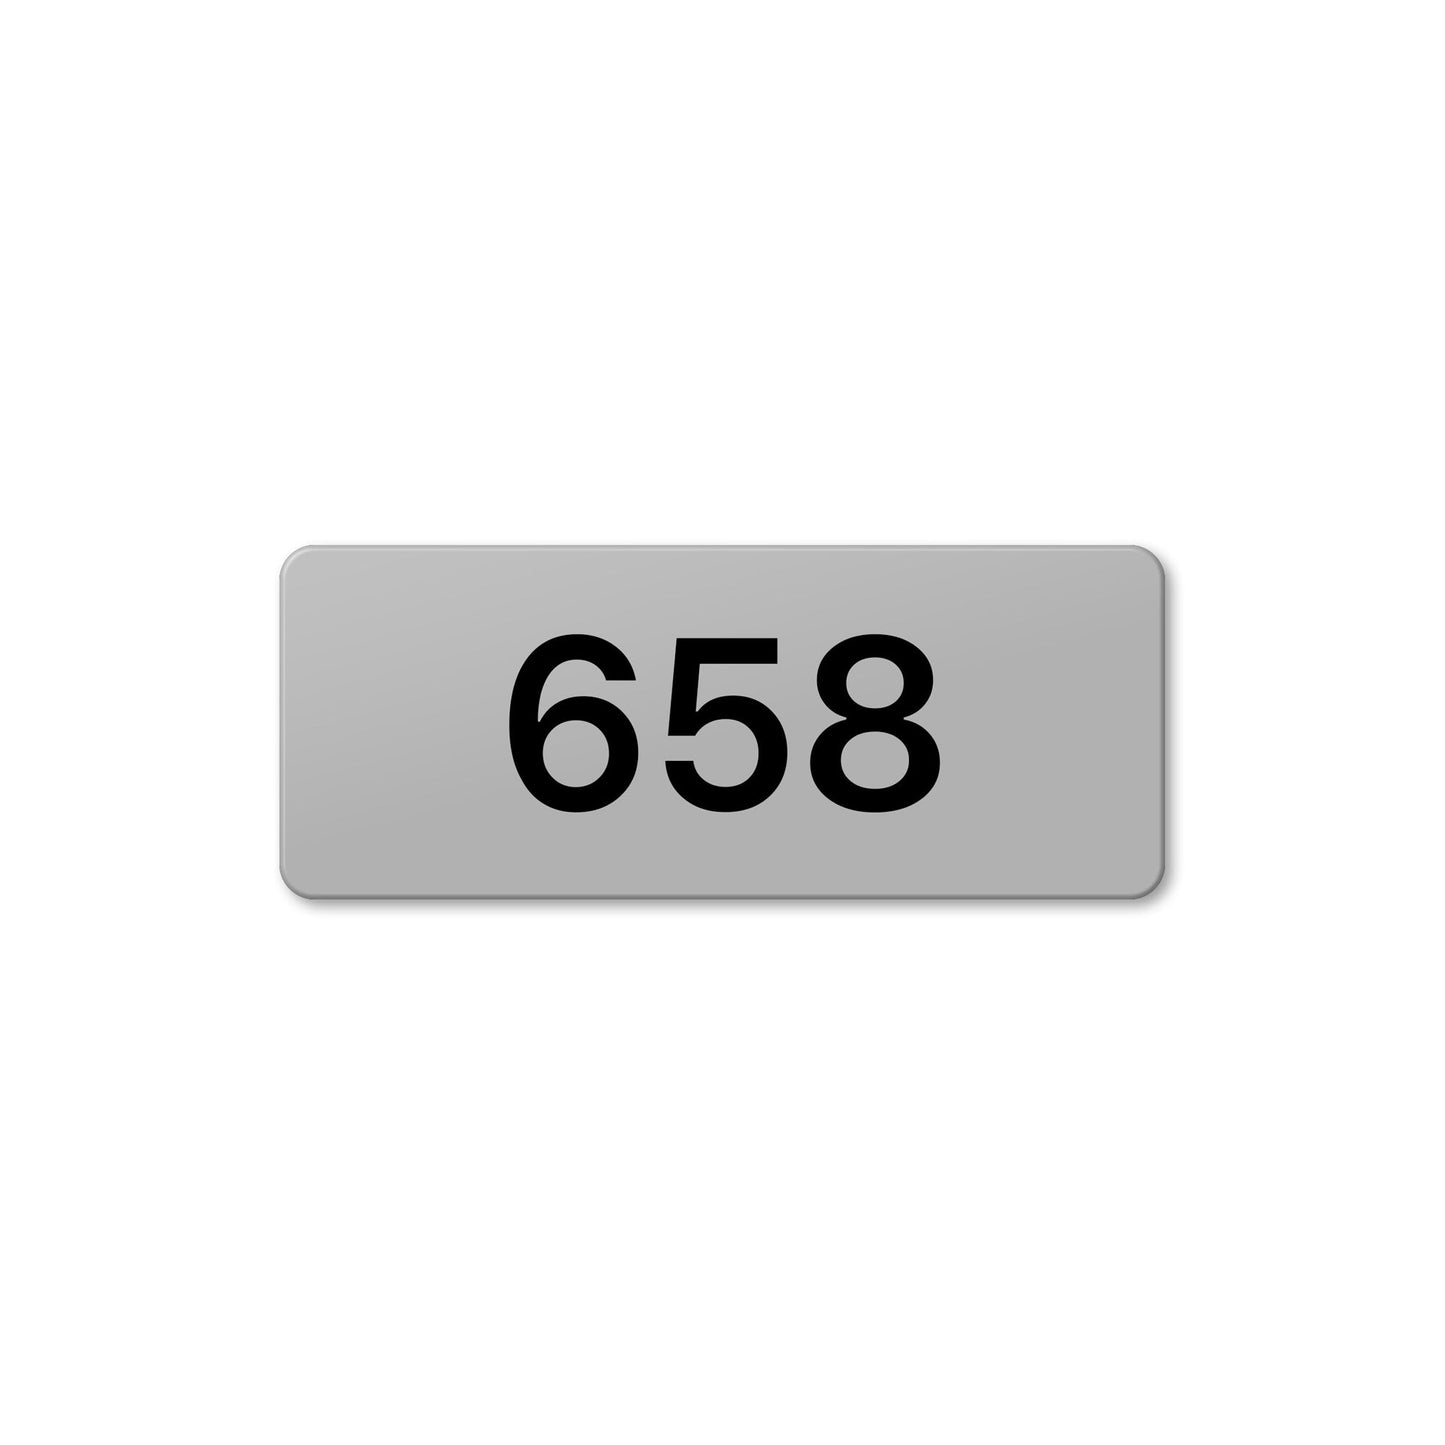 Numeral 658